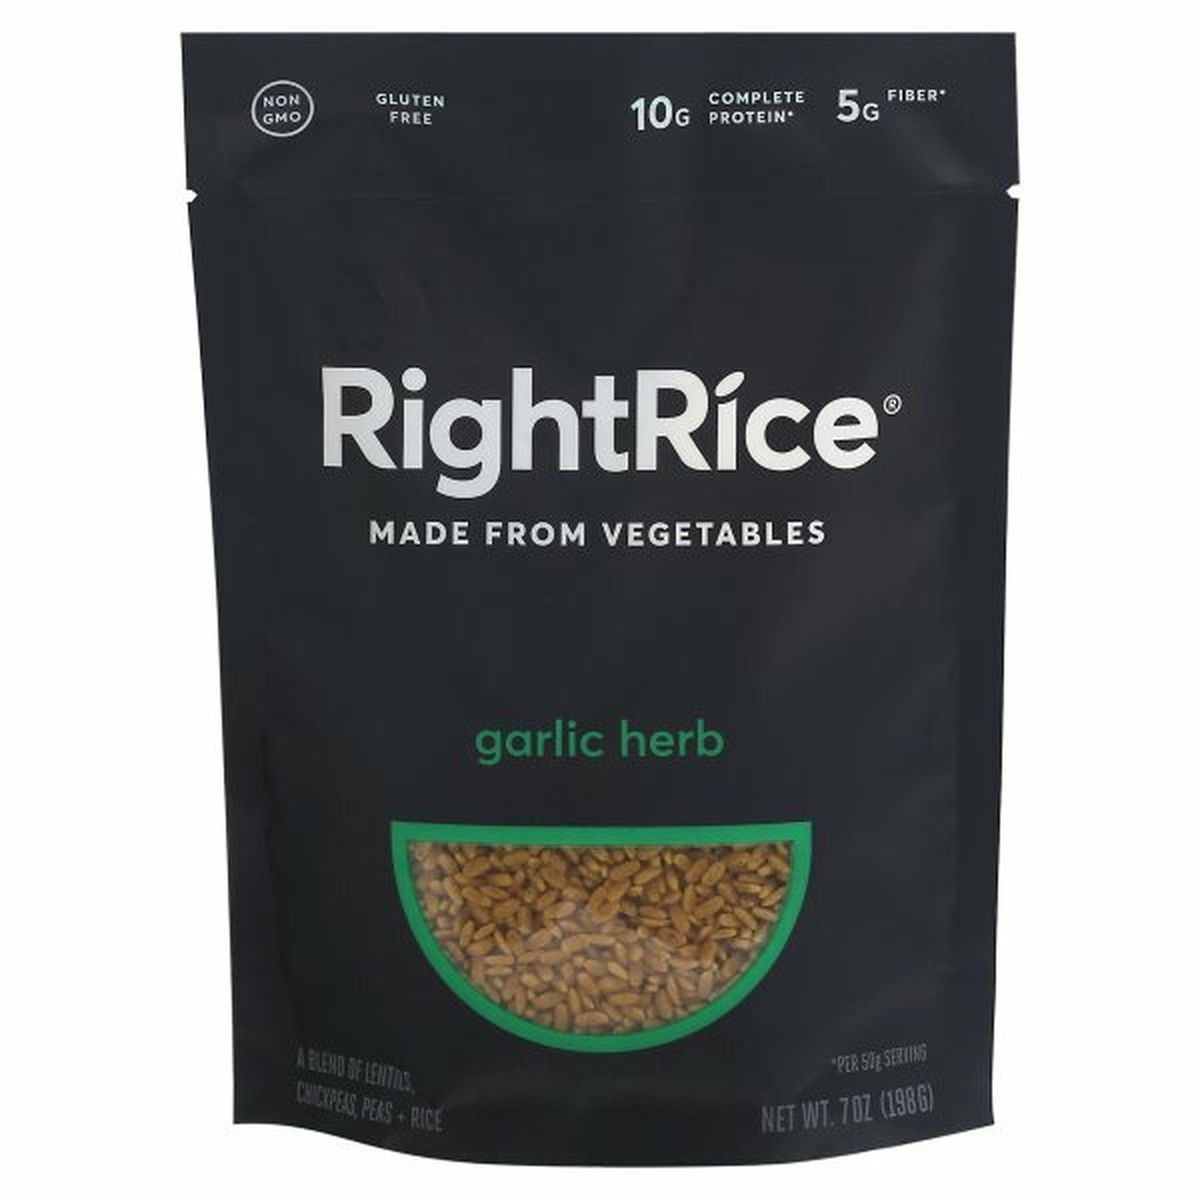 Calories in RightRice Rice, Garlic Herb, Made from Vegetables